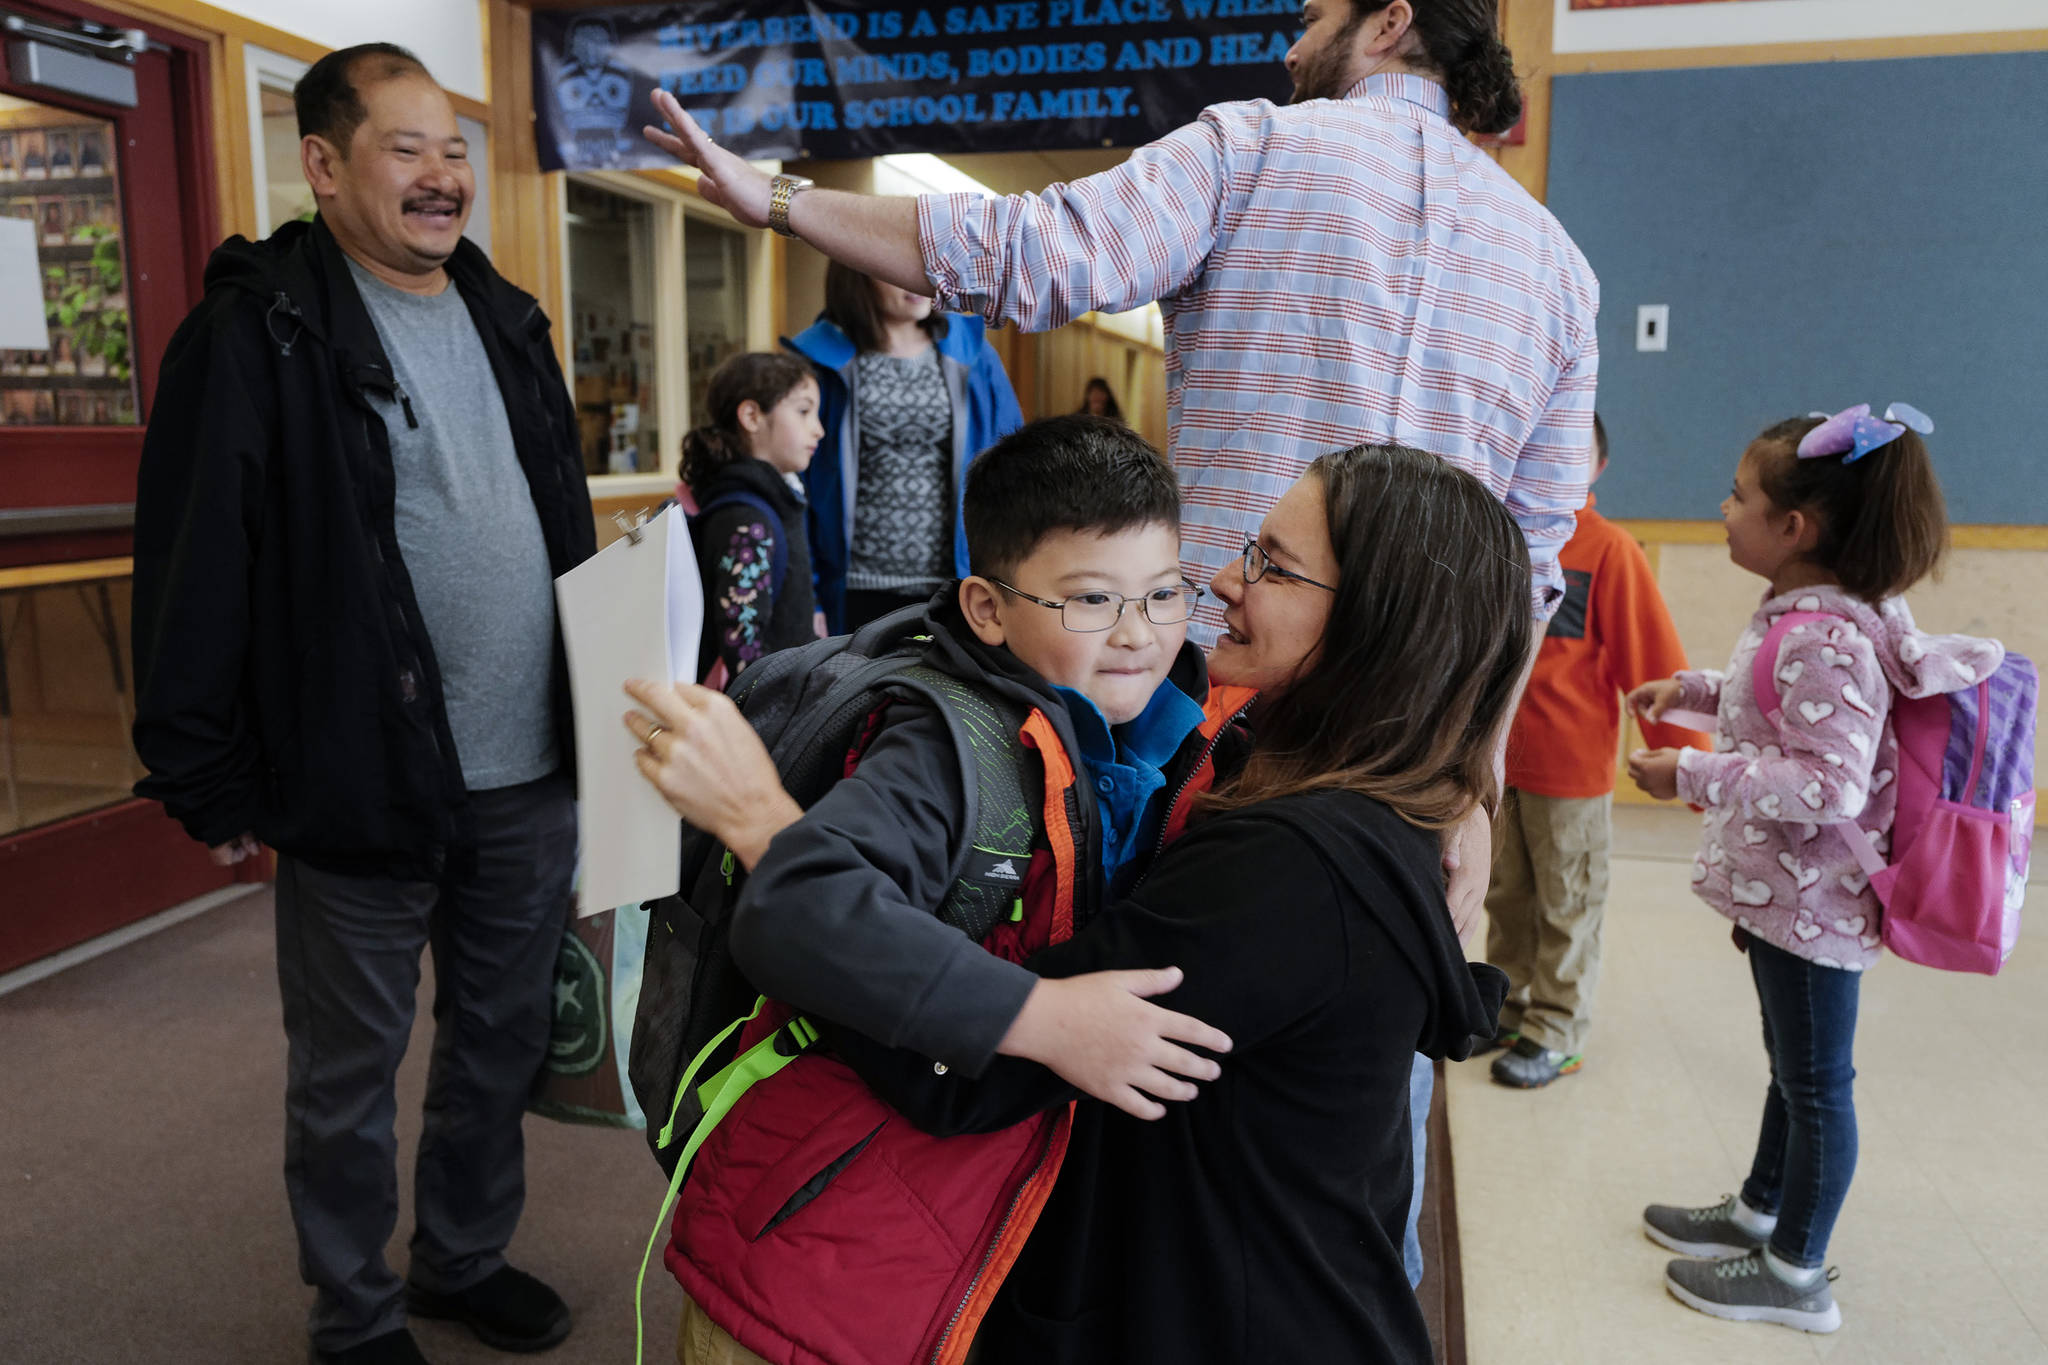 Nghiem Tran, left, watches as his son, William, arrives for second grade and is greeted by Music Teacher Rebecca Ricker on the first day of school at Riverbend Elementary School on Monday, Aug. 19, 2019. (Michael Penn | Juneau Empire)